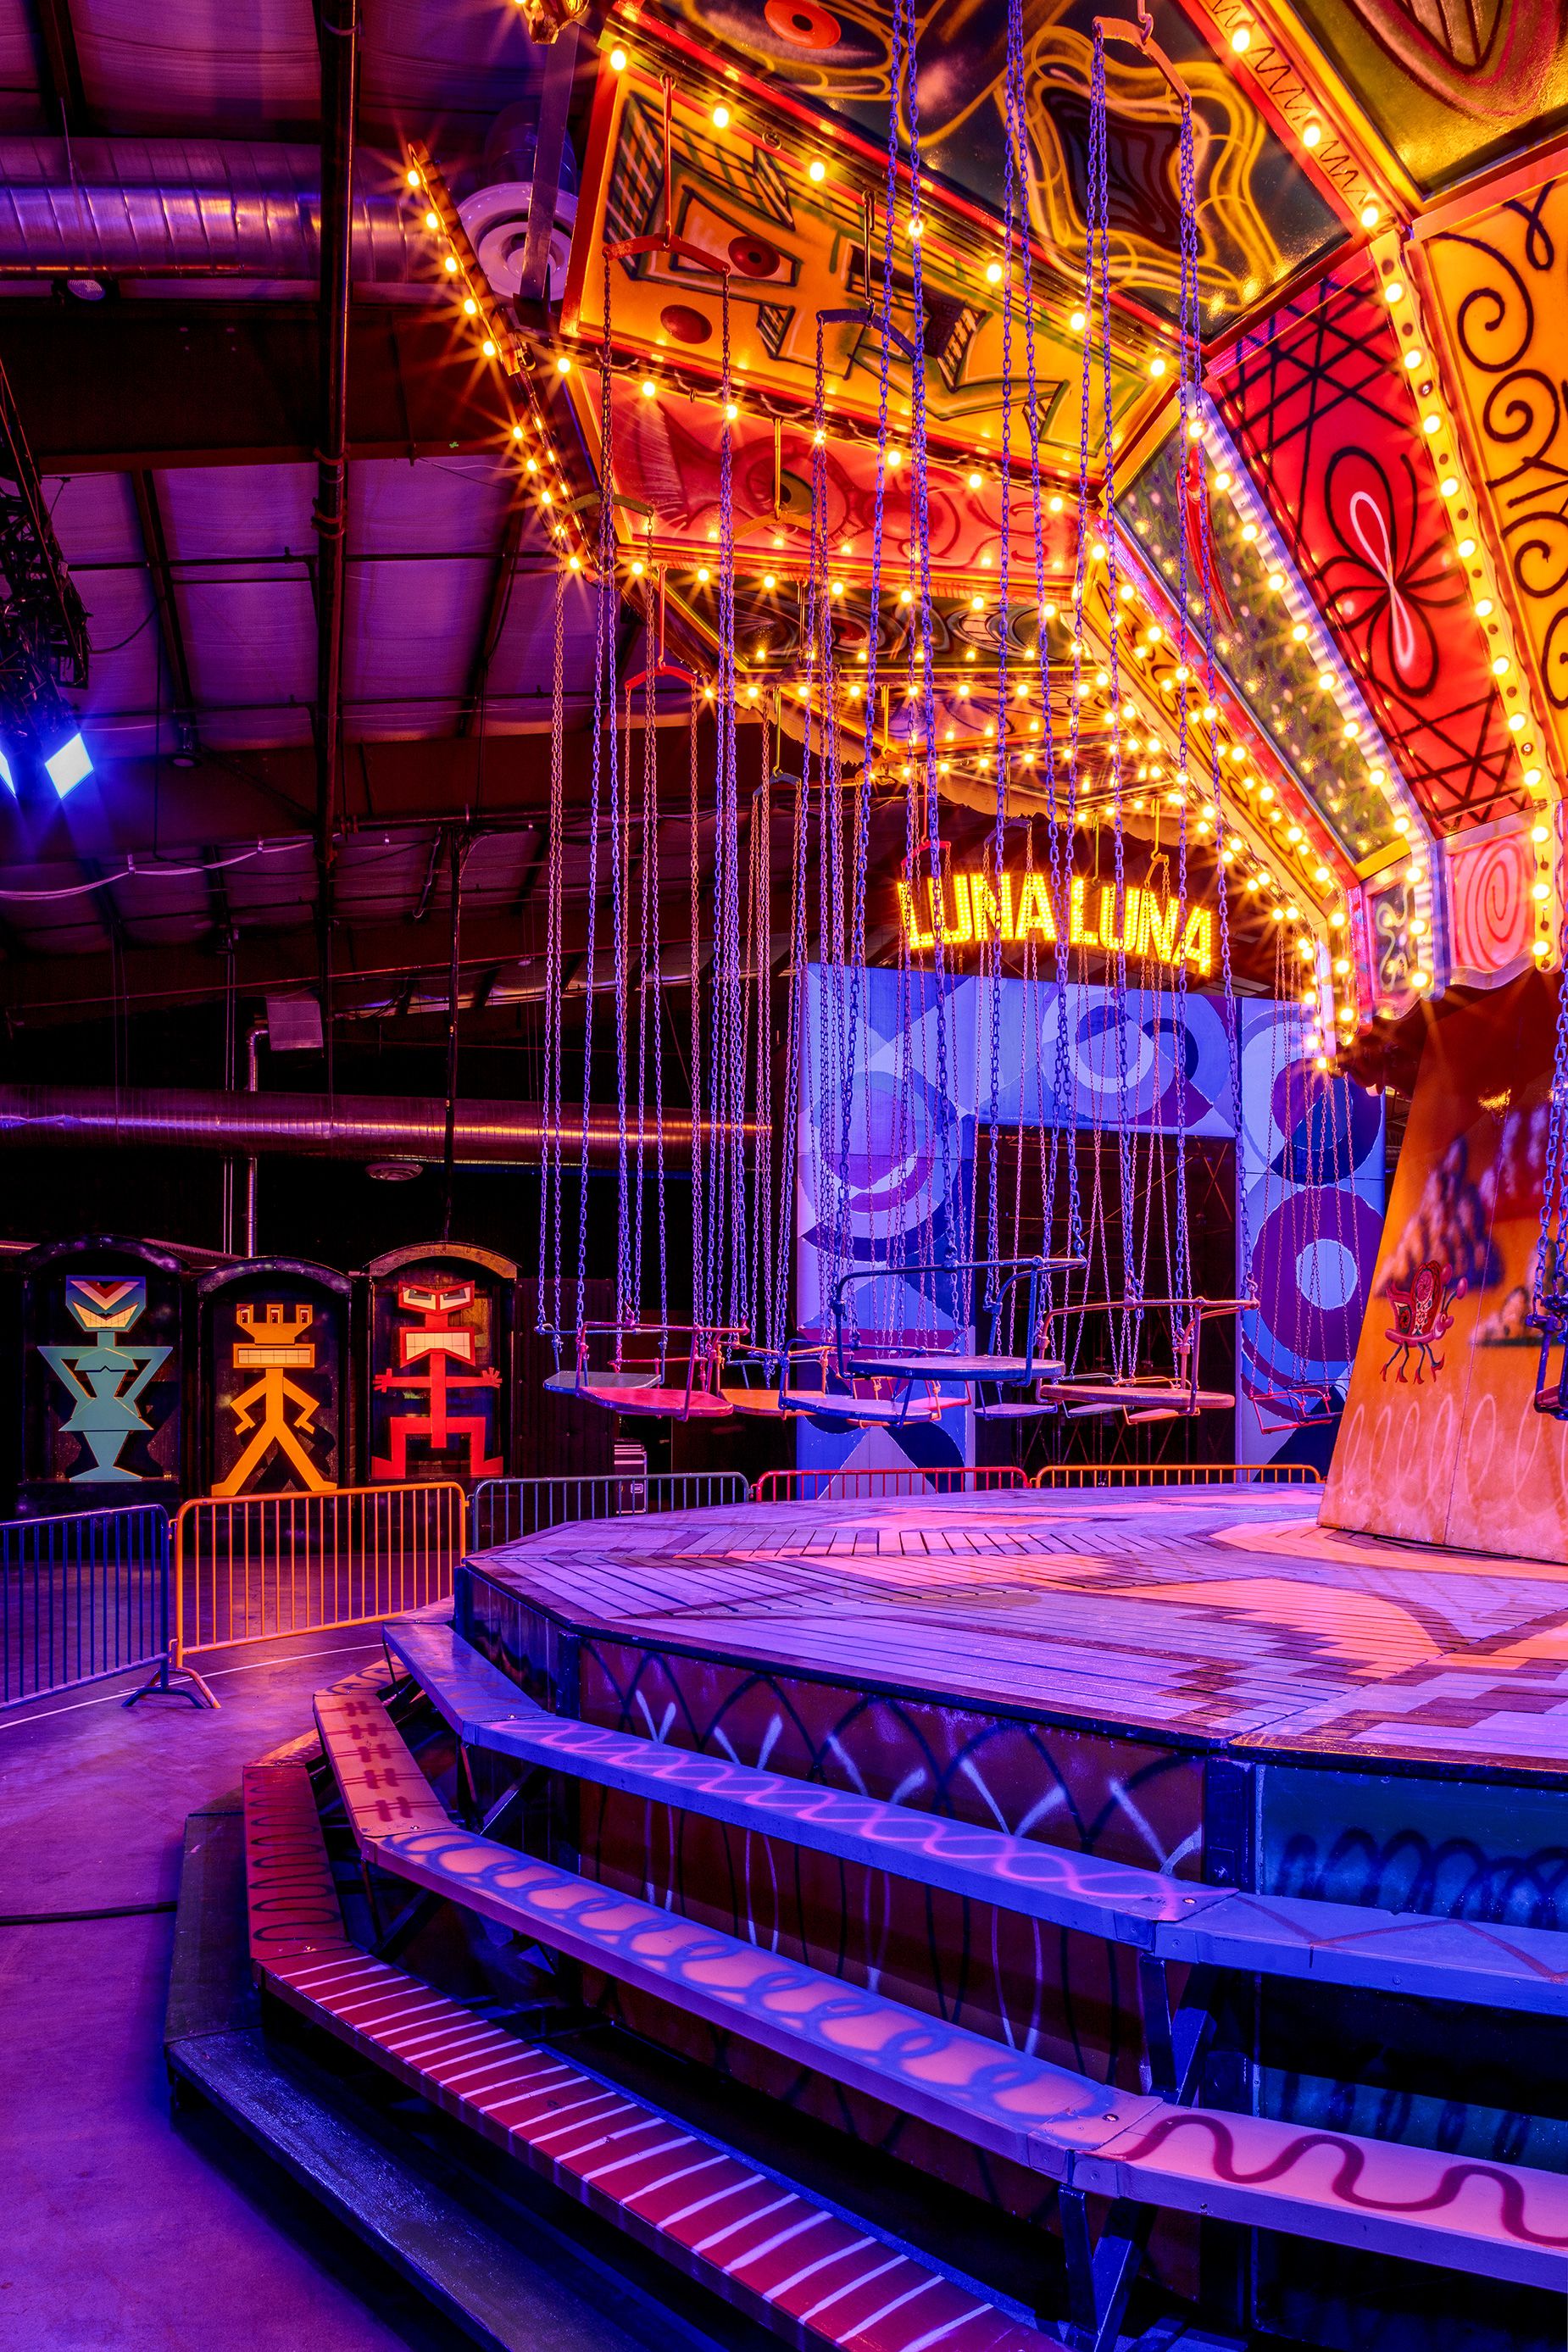 Carnival lights illuminate a trippy chair swing ride by Kenny Scharf, one of Luna Land's statement rides.